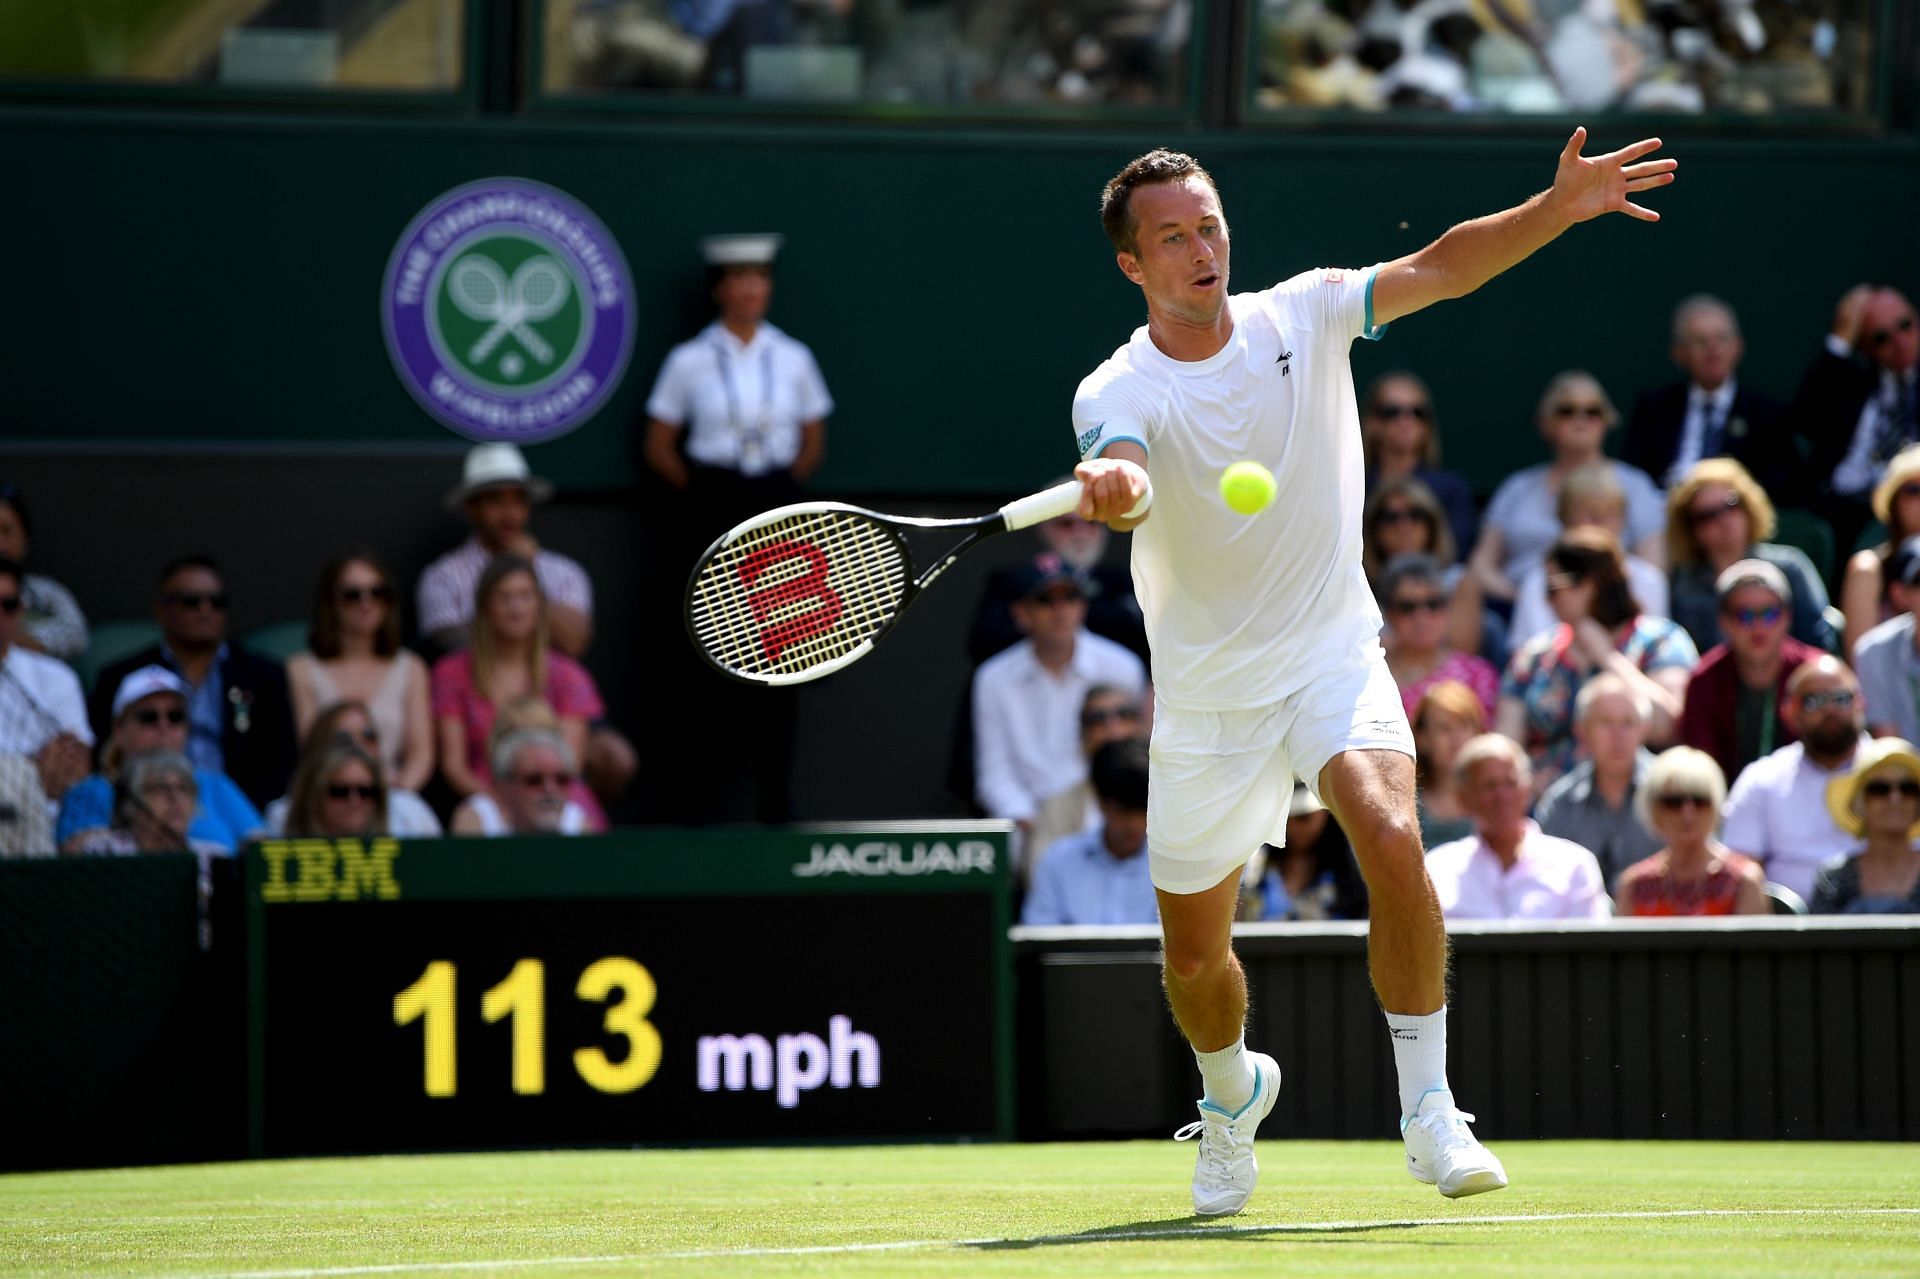 Philipp Kohlschreiber is playing his last tournament at Wimbledon 2022.